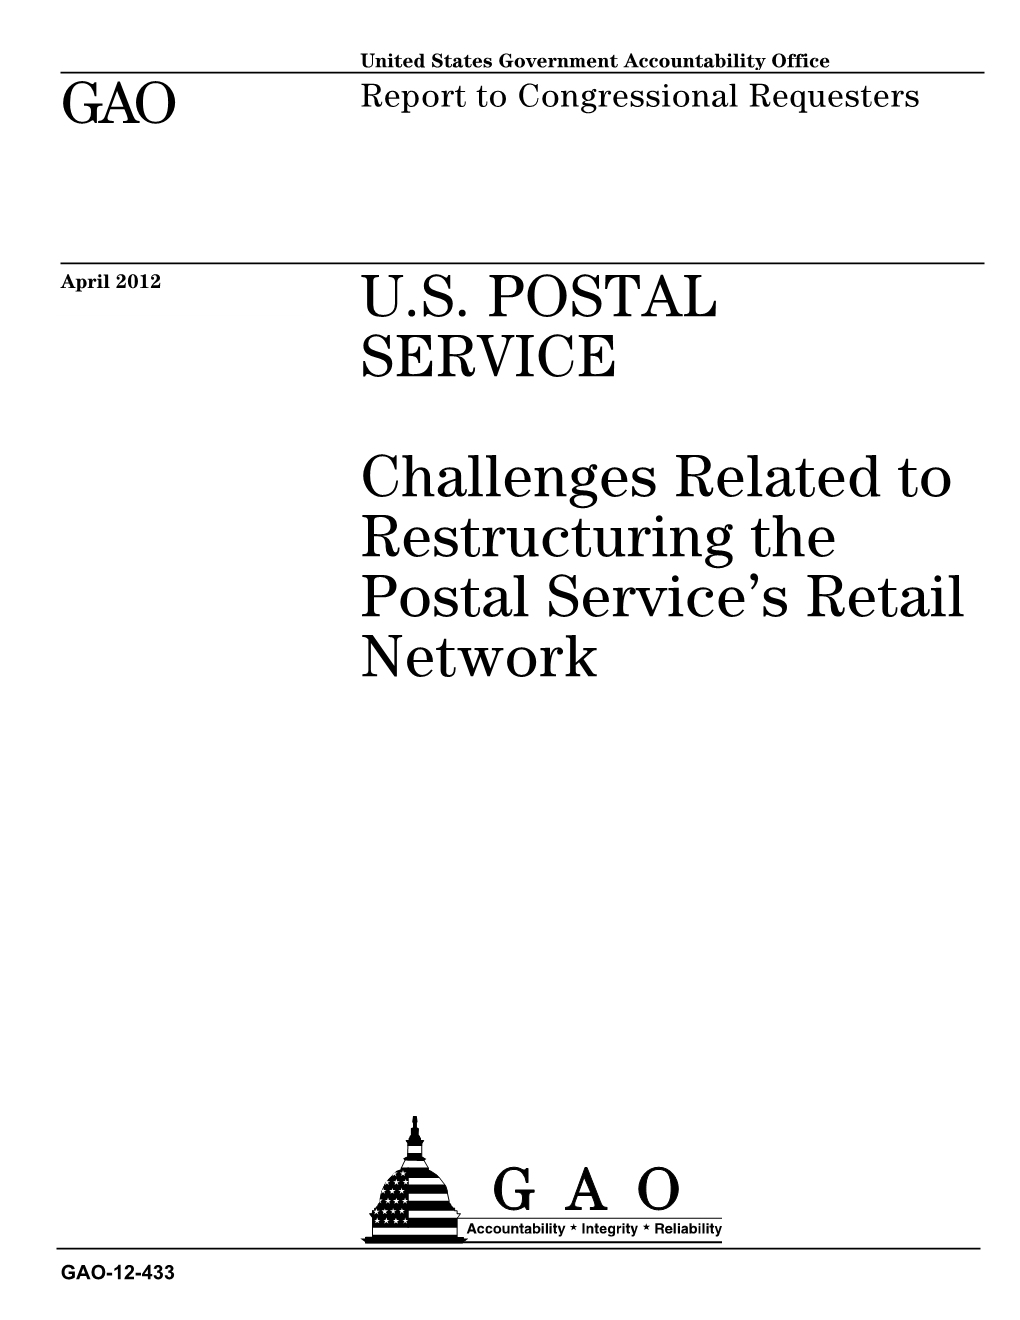 Challenges Related to Restructuring the Postal Services Retail Network